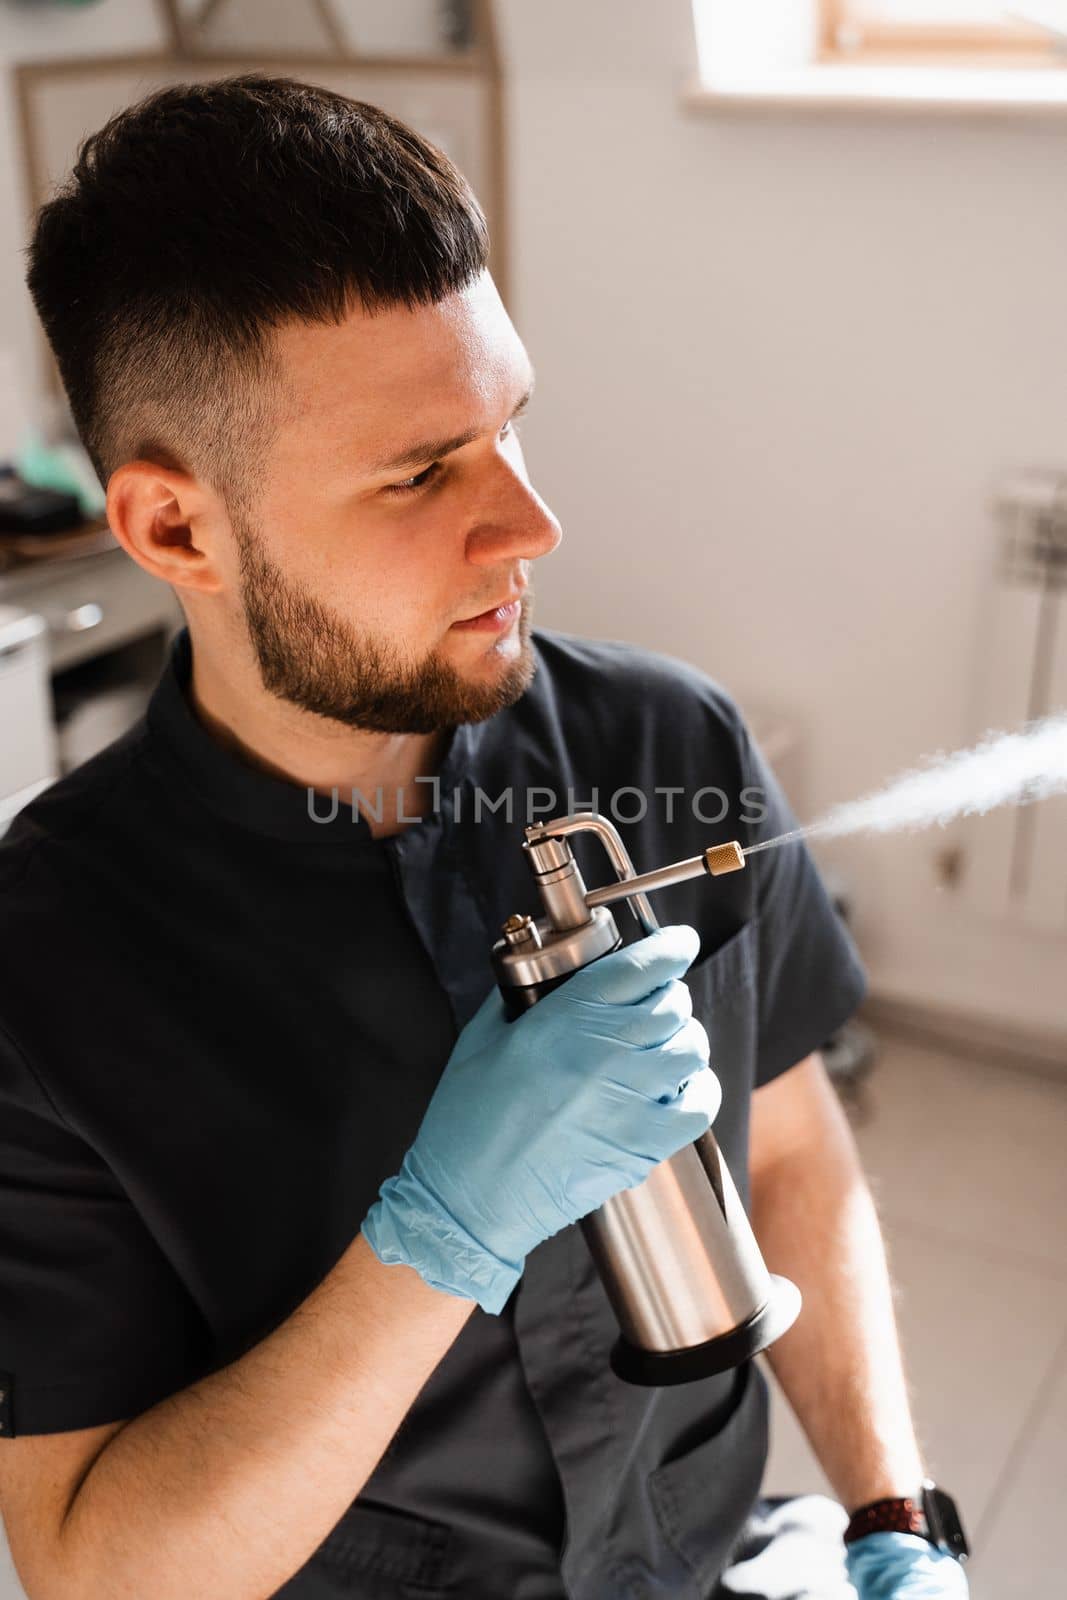 ENT doctor spray nitrogen for cryo therapy. Procedures of for mucosal renewal and treatment of chronic pharyngitis and tonsollitae. Doctor otolaryngologist with cryosprayer